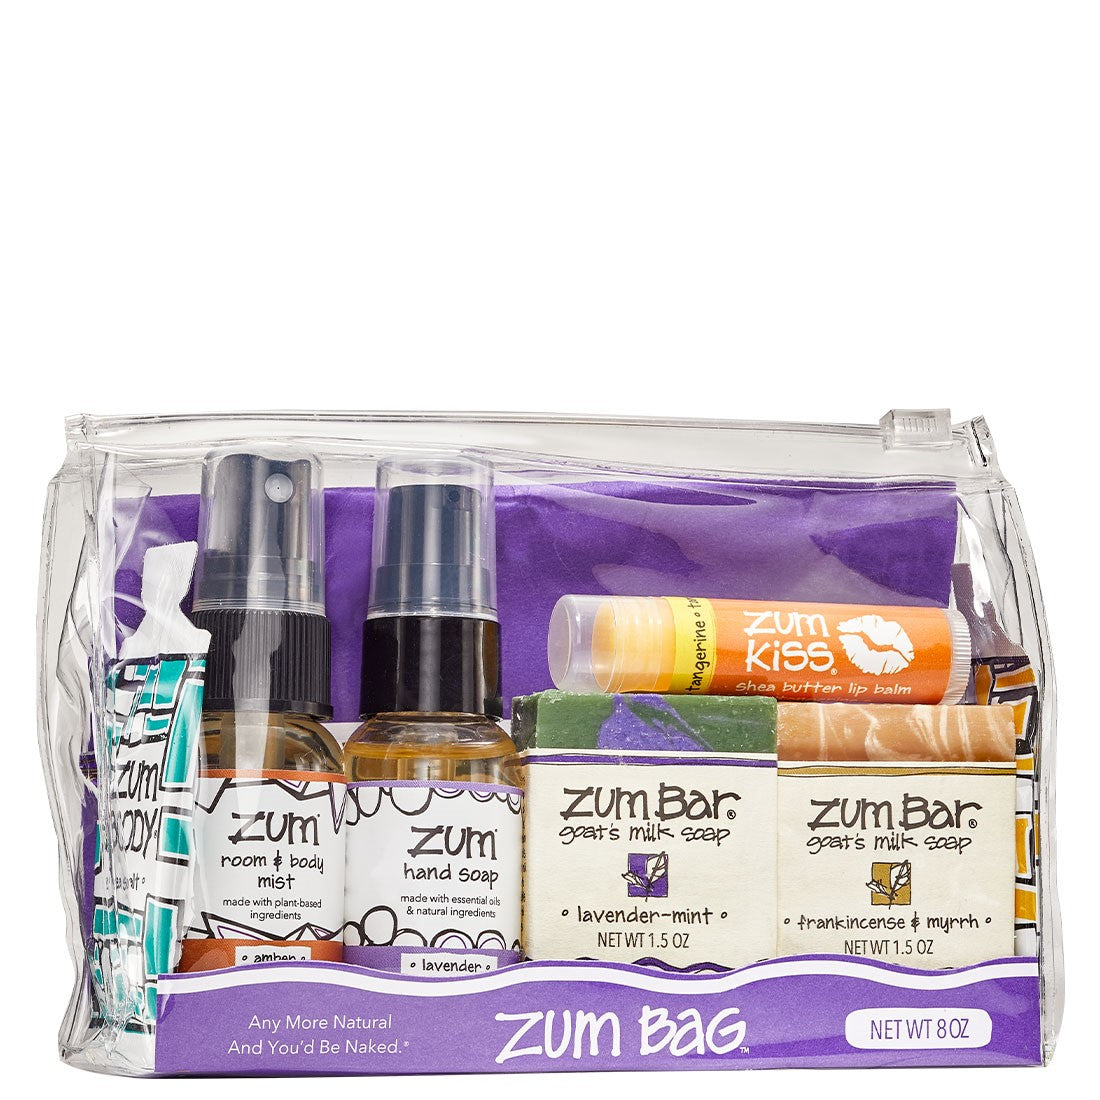 Clear bag filled with various mini Zum products